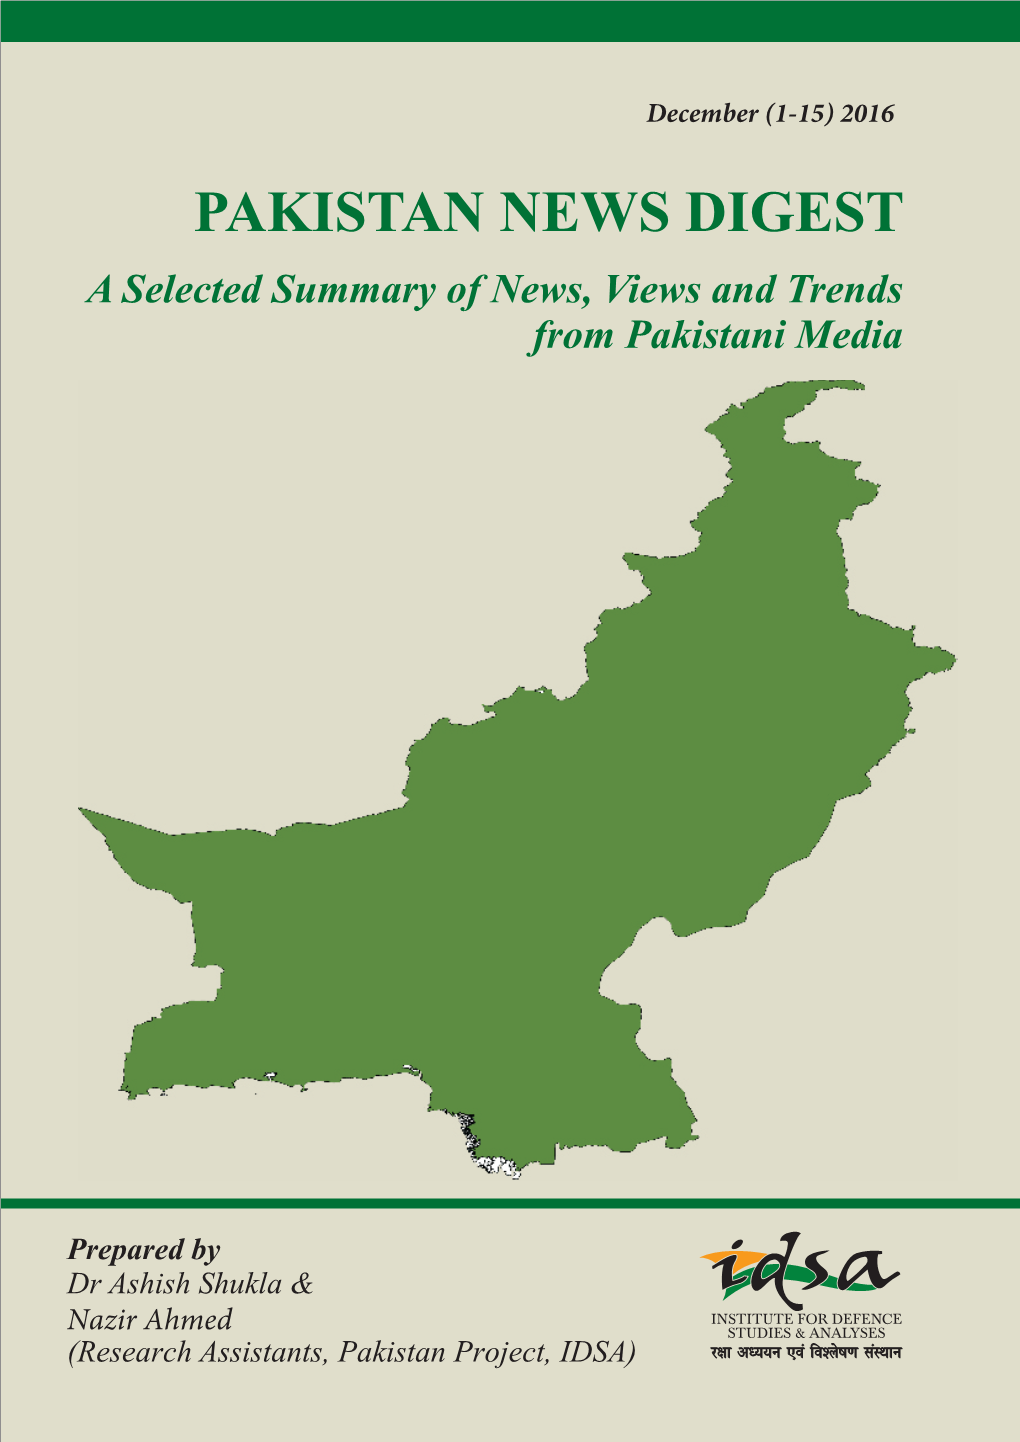 December (1-15) 2016 PAKISTAN NEWS DIGEST a Selected Summary of News, Views and Trends from Pakistani Media